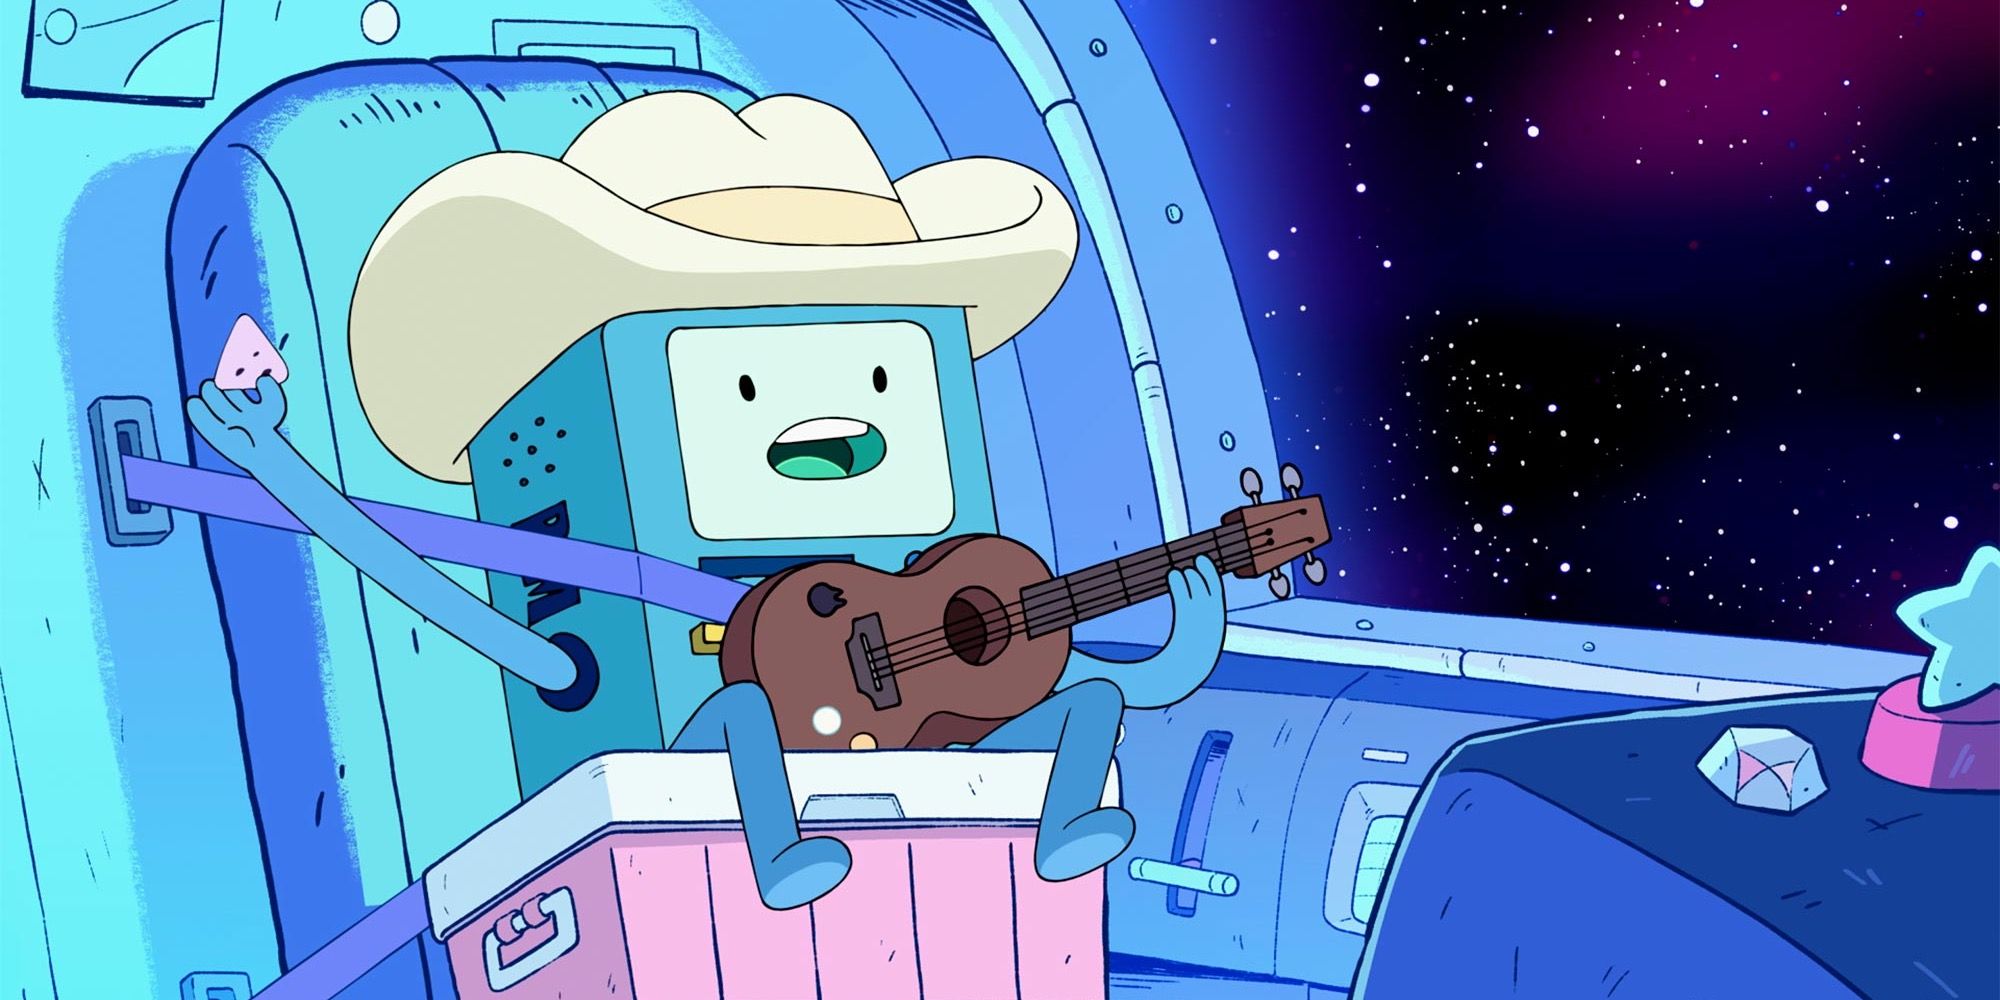 BMO wearing a cowboy hat and playing a guitar